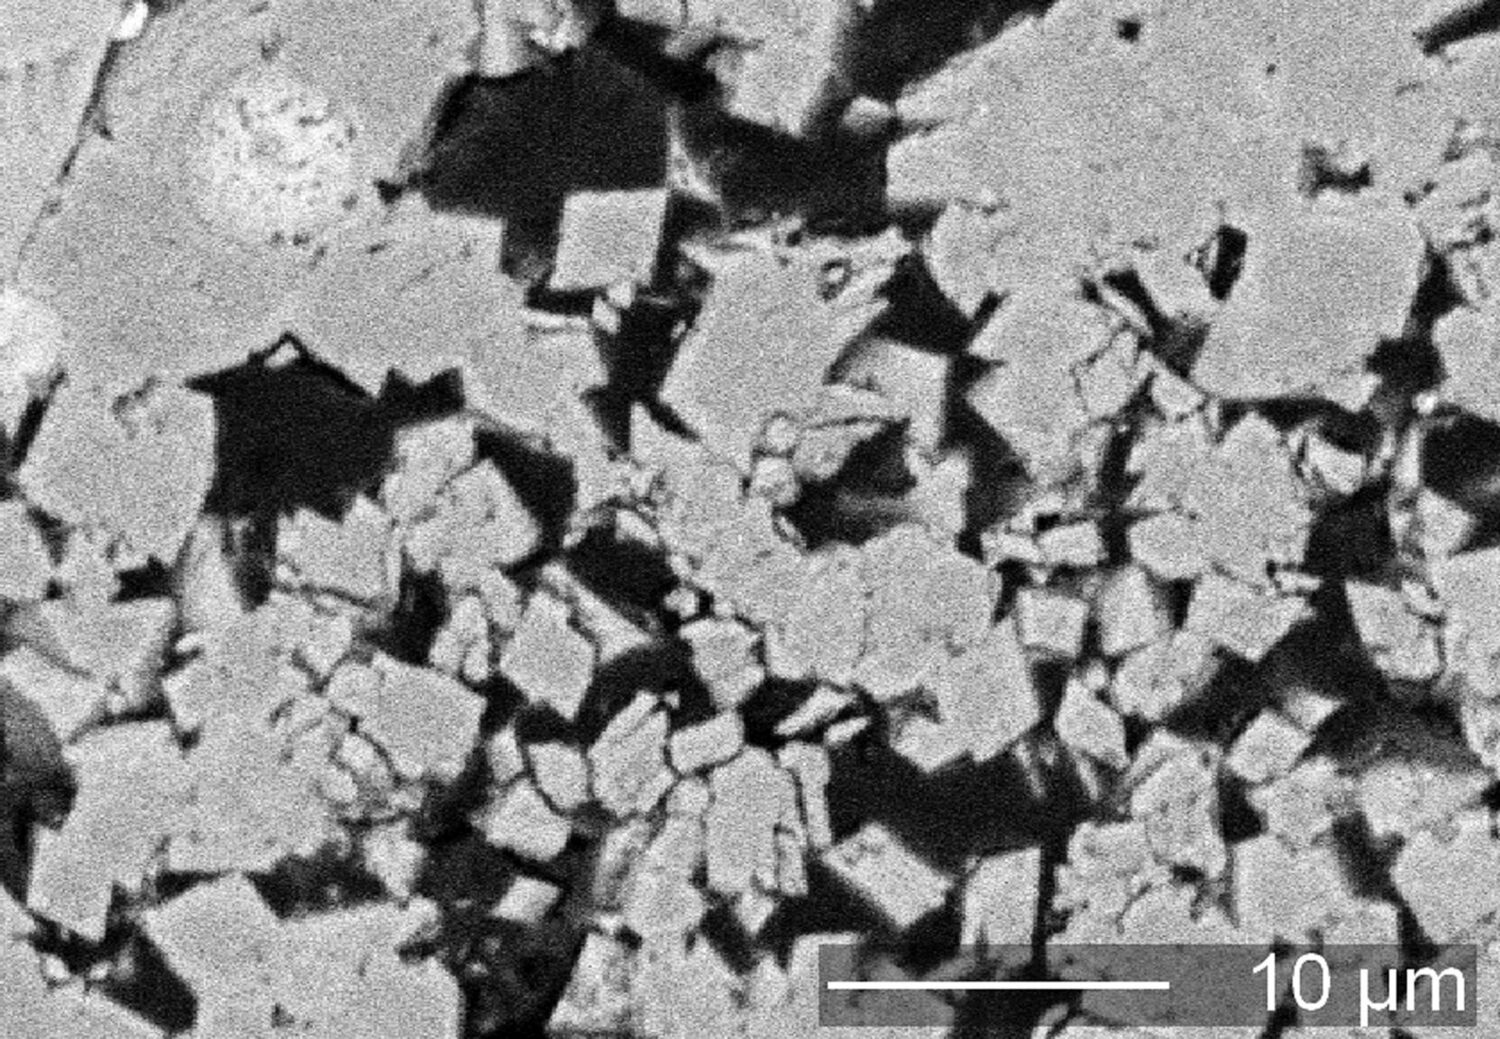 Scanning electron microscope image using material taken in the drill core from the borehole taken in 1981 from the Nördlinger Ries reveals dolomite crystals with rhombohedral shape.